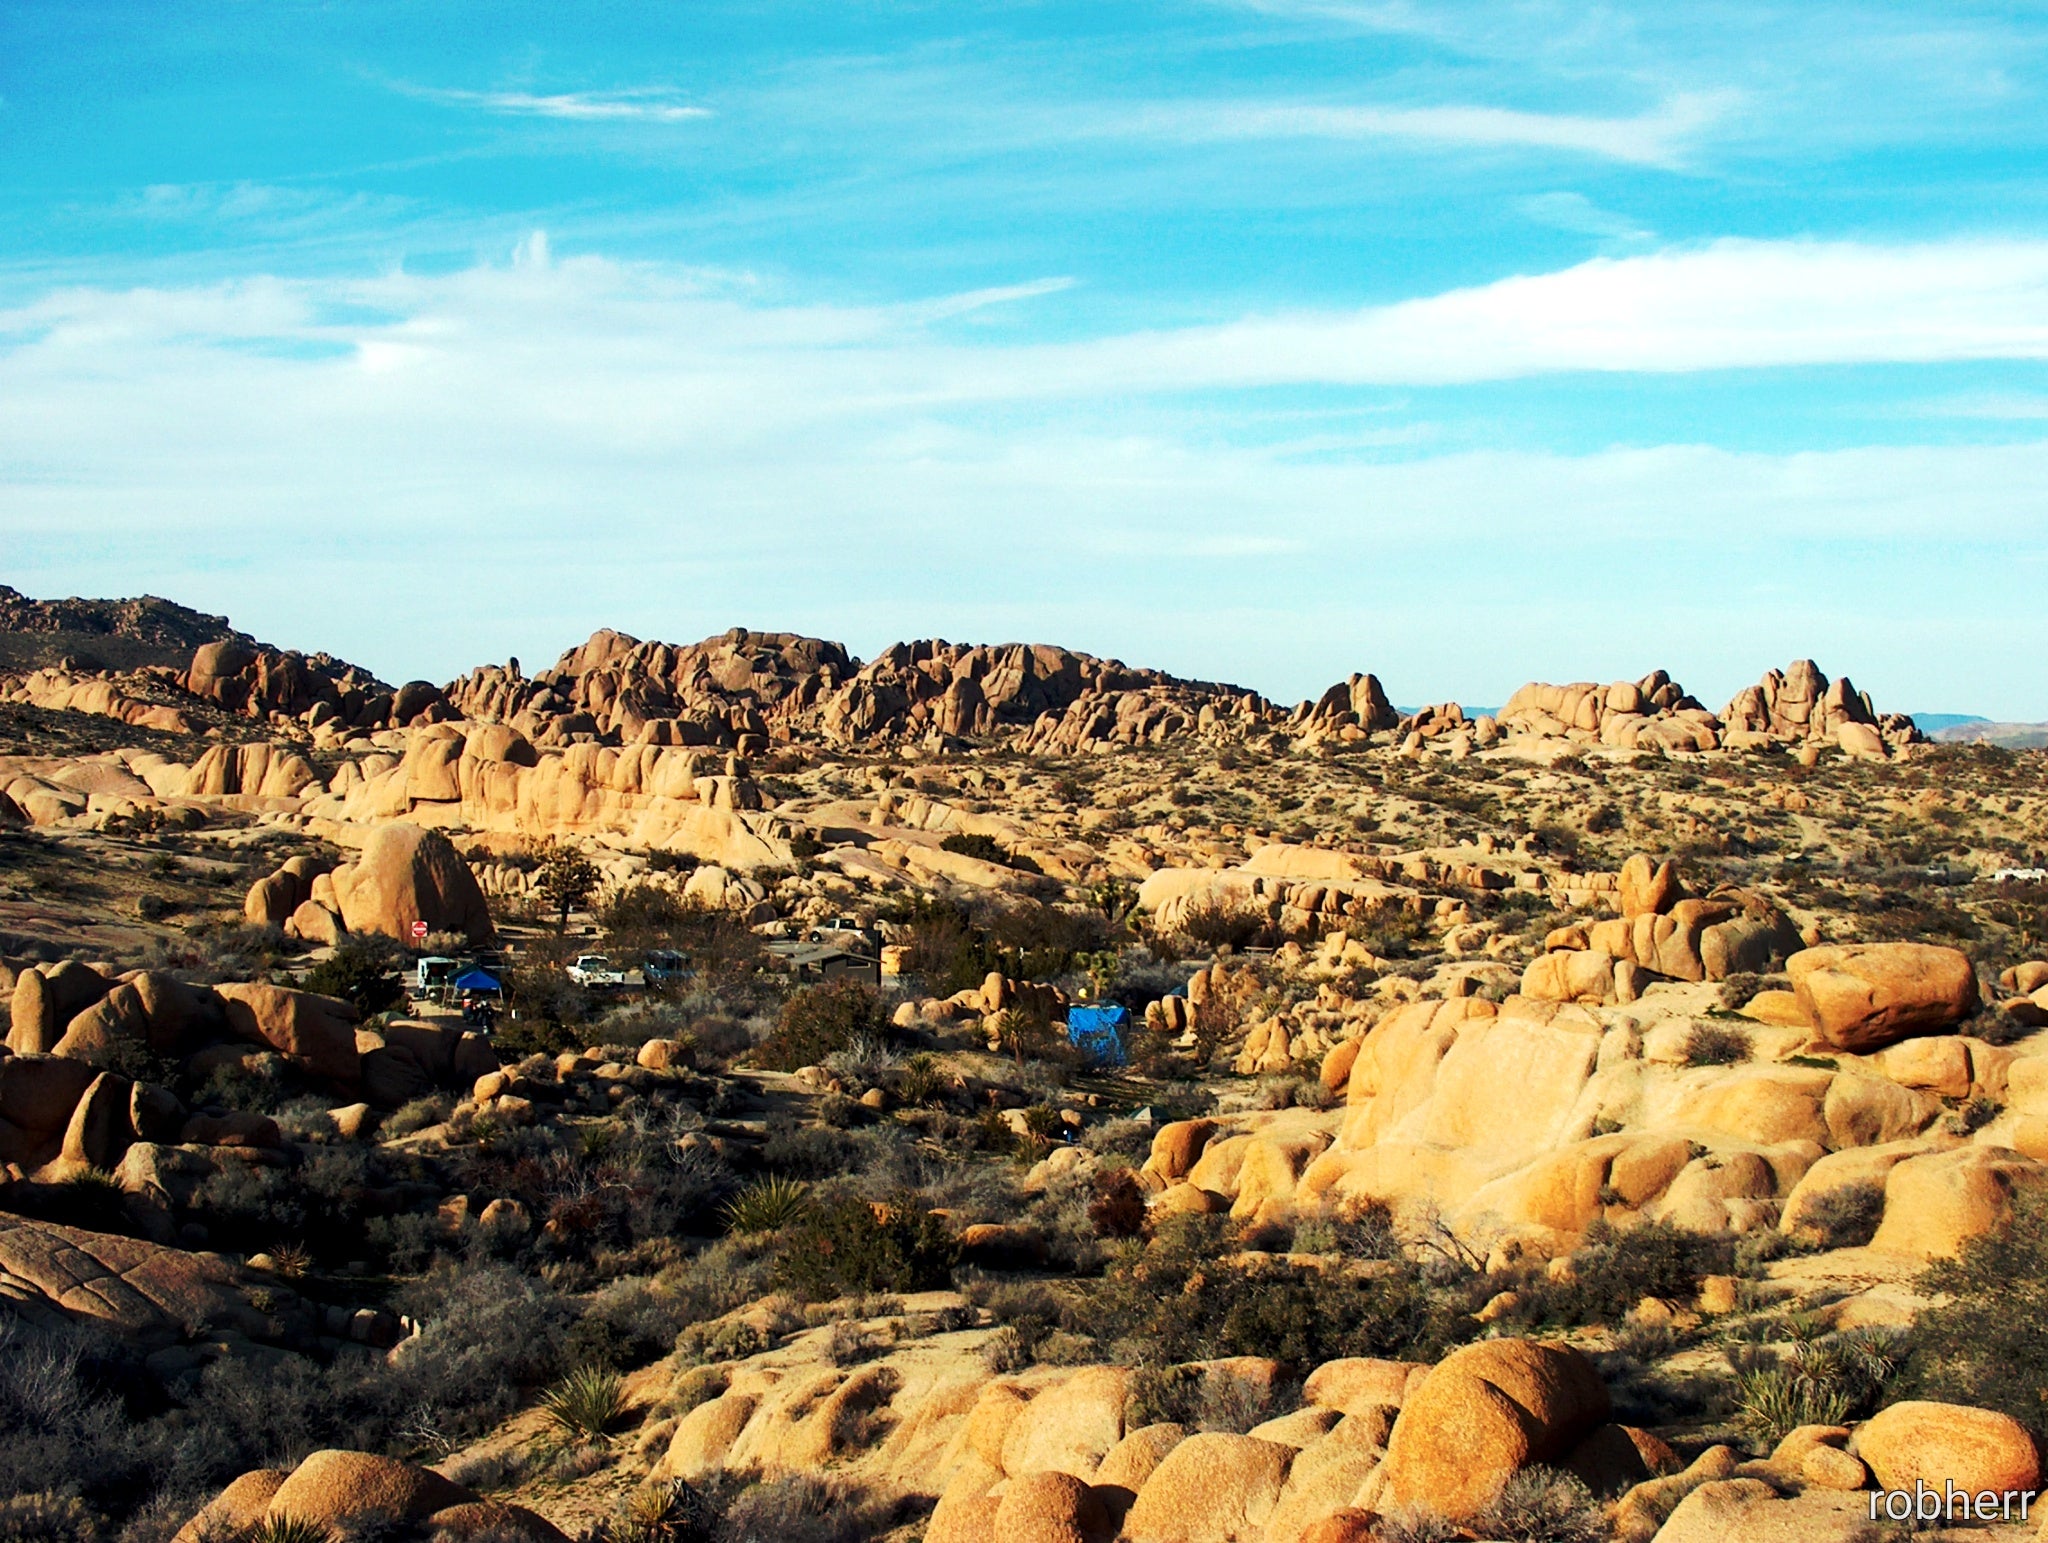 Campsites are nestled among the rocks